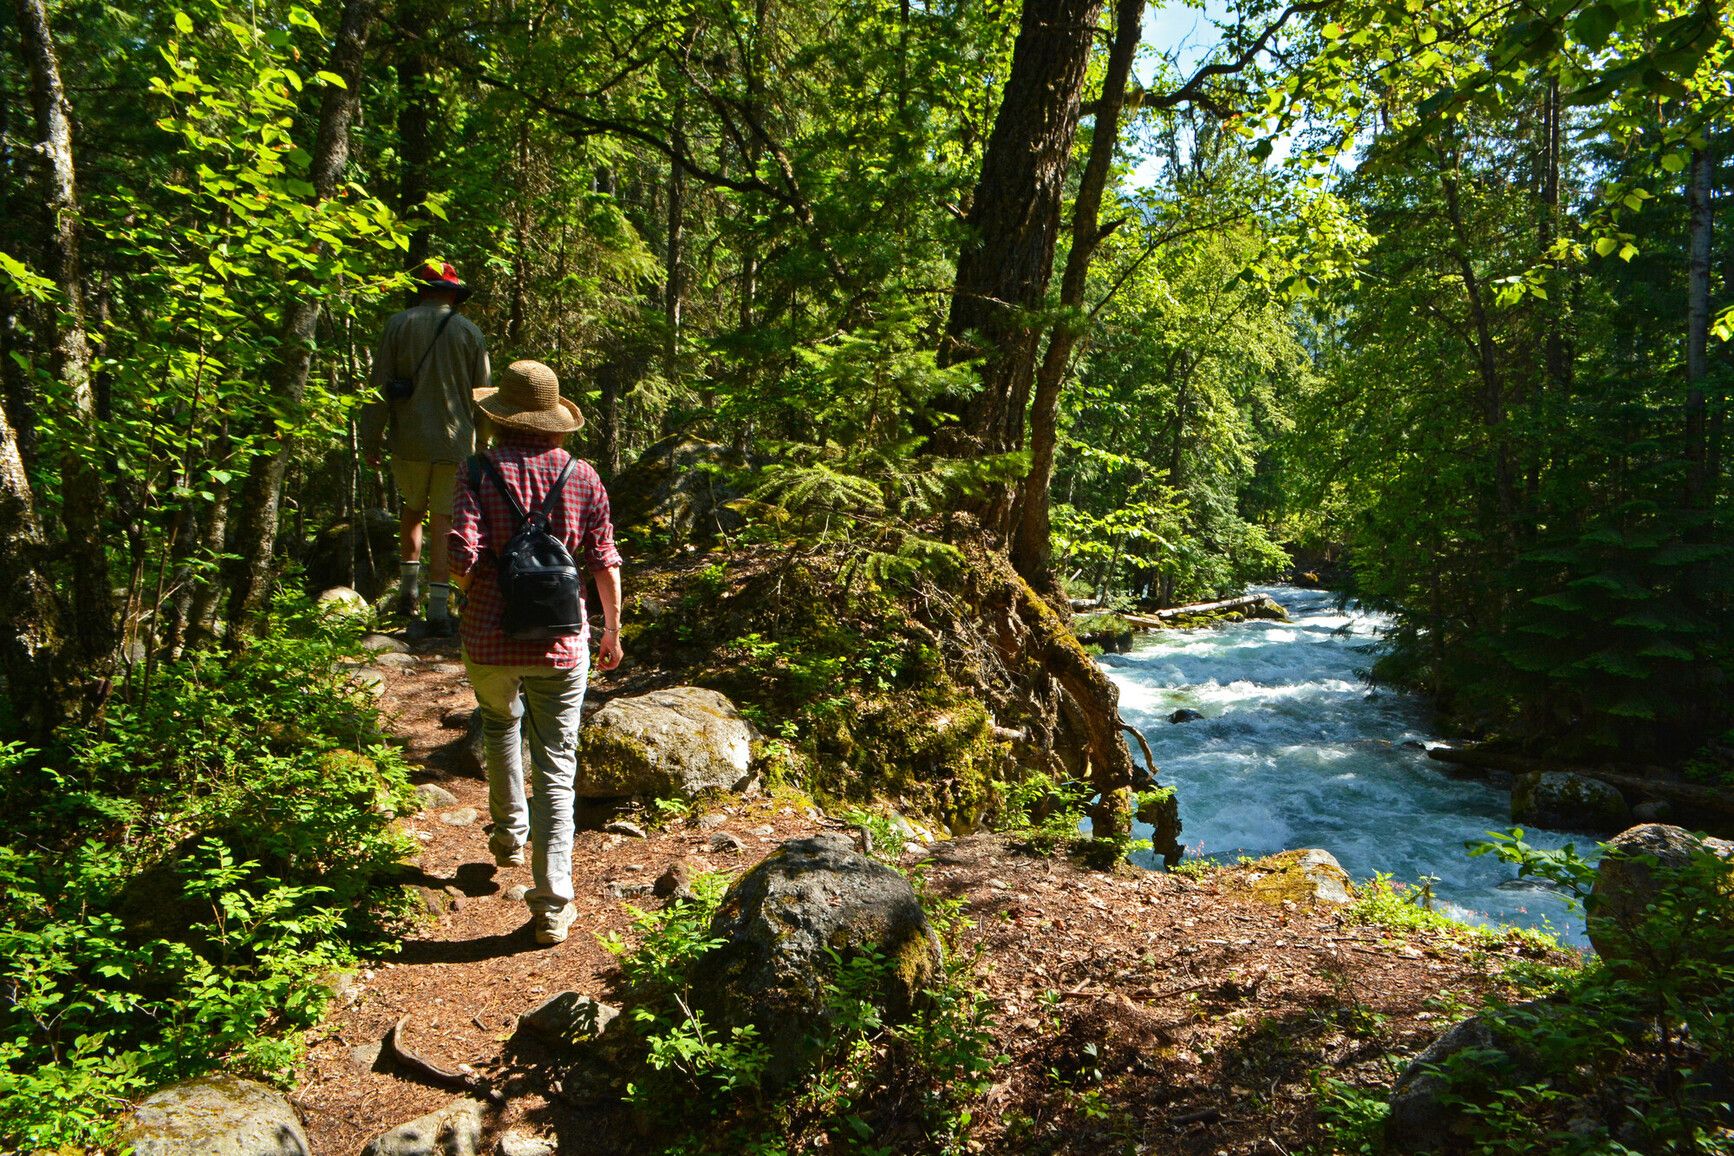 Immerse yourself in the serene sound of Kokanee Creek flowing through the forest as you hike a trail in the park.